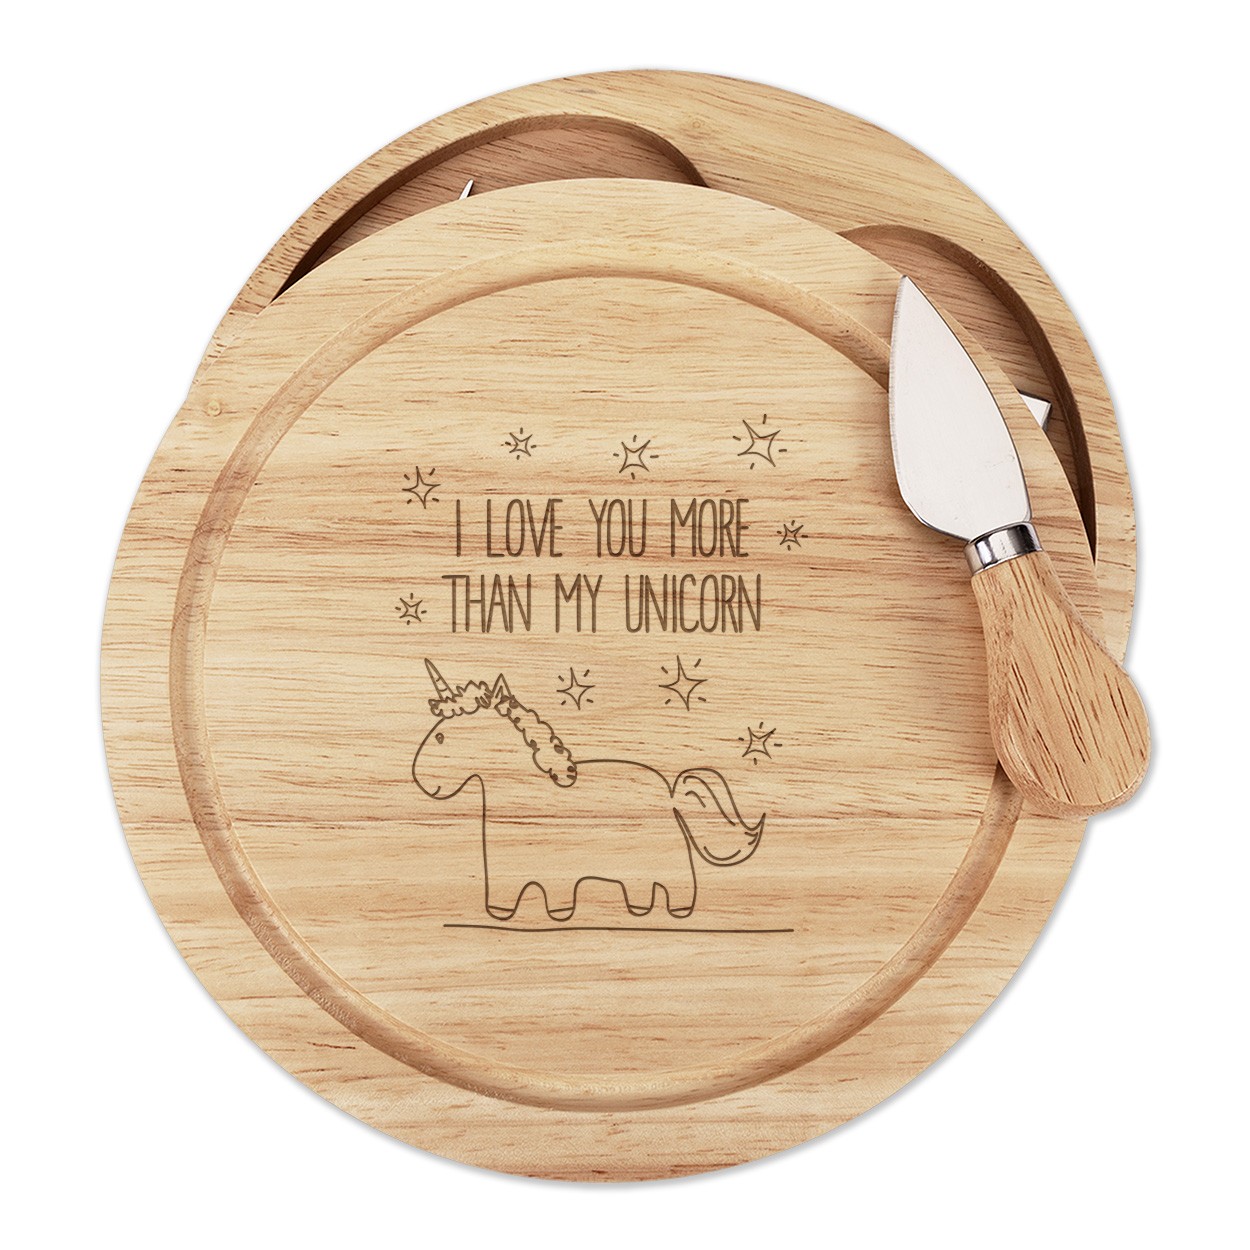 Lila I Love You More Than My Unicorn Wooden Cheese Board Set 4 Knives